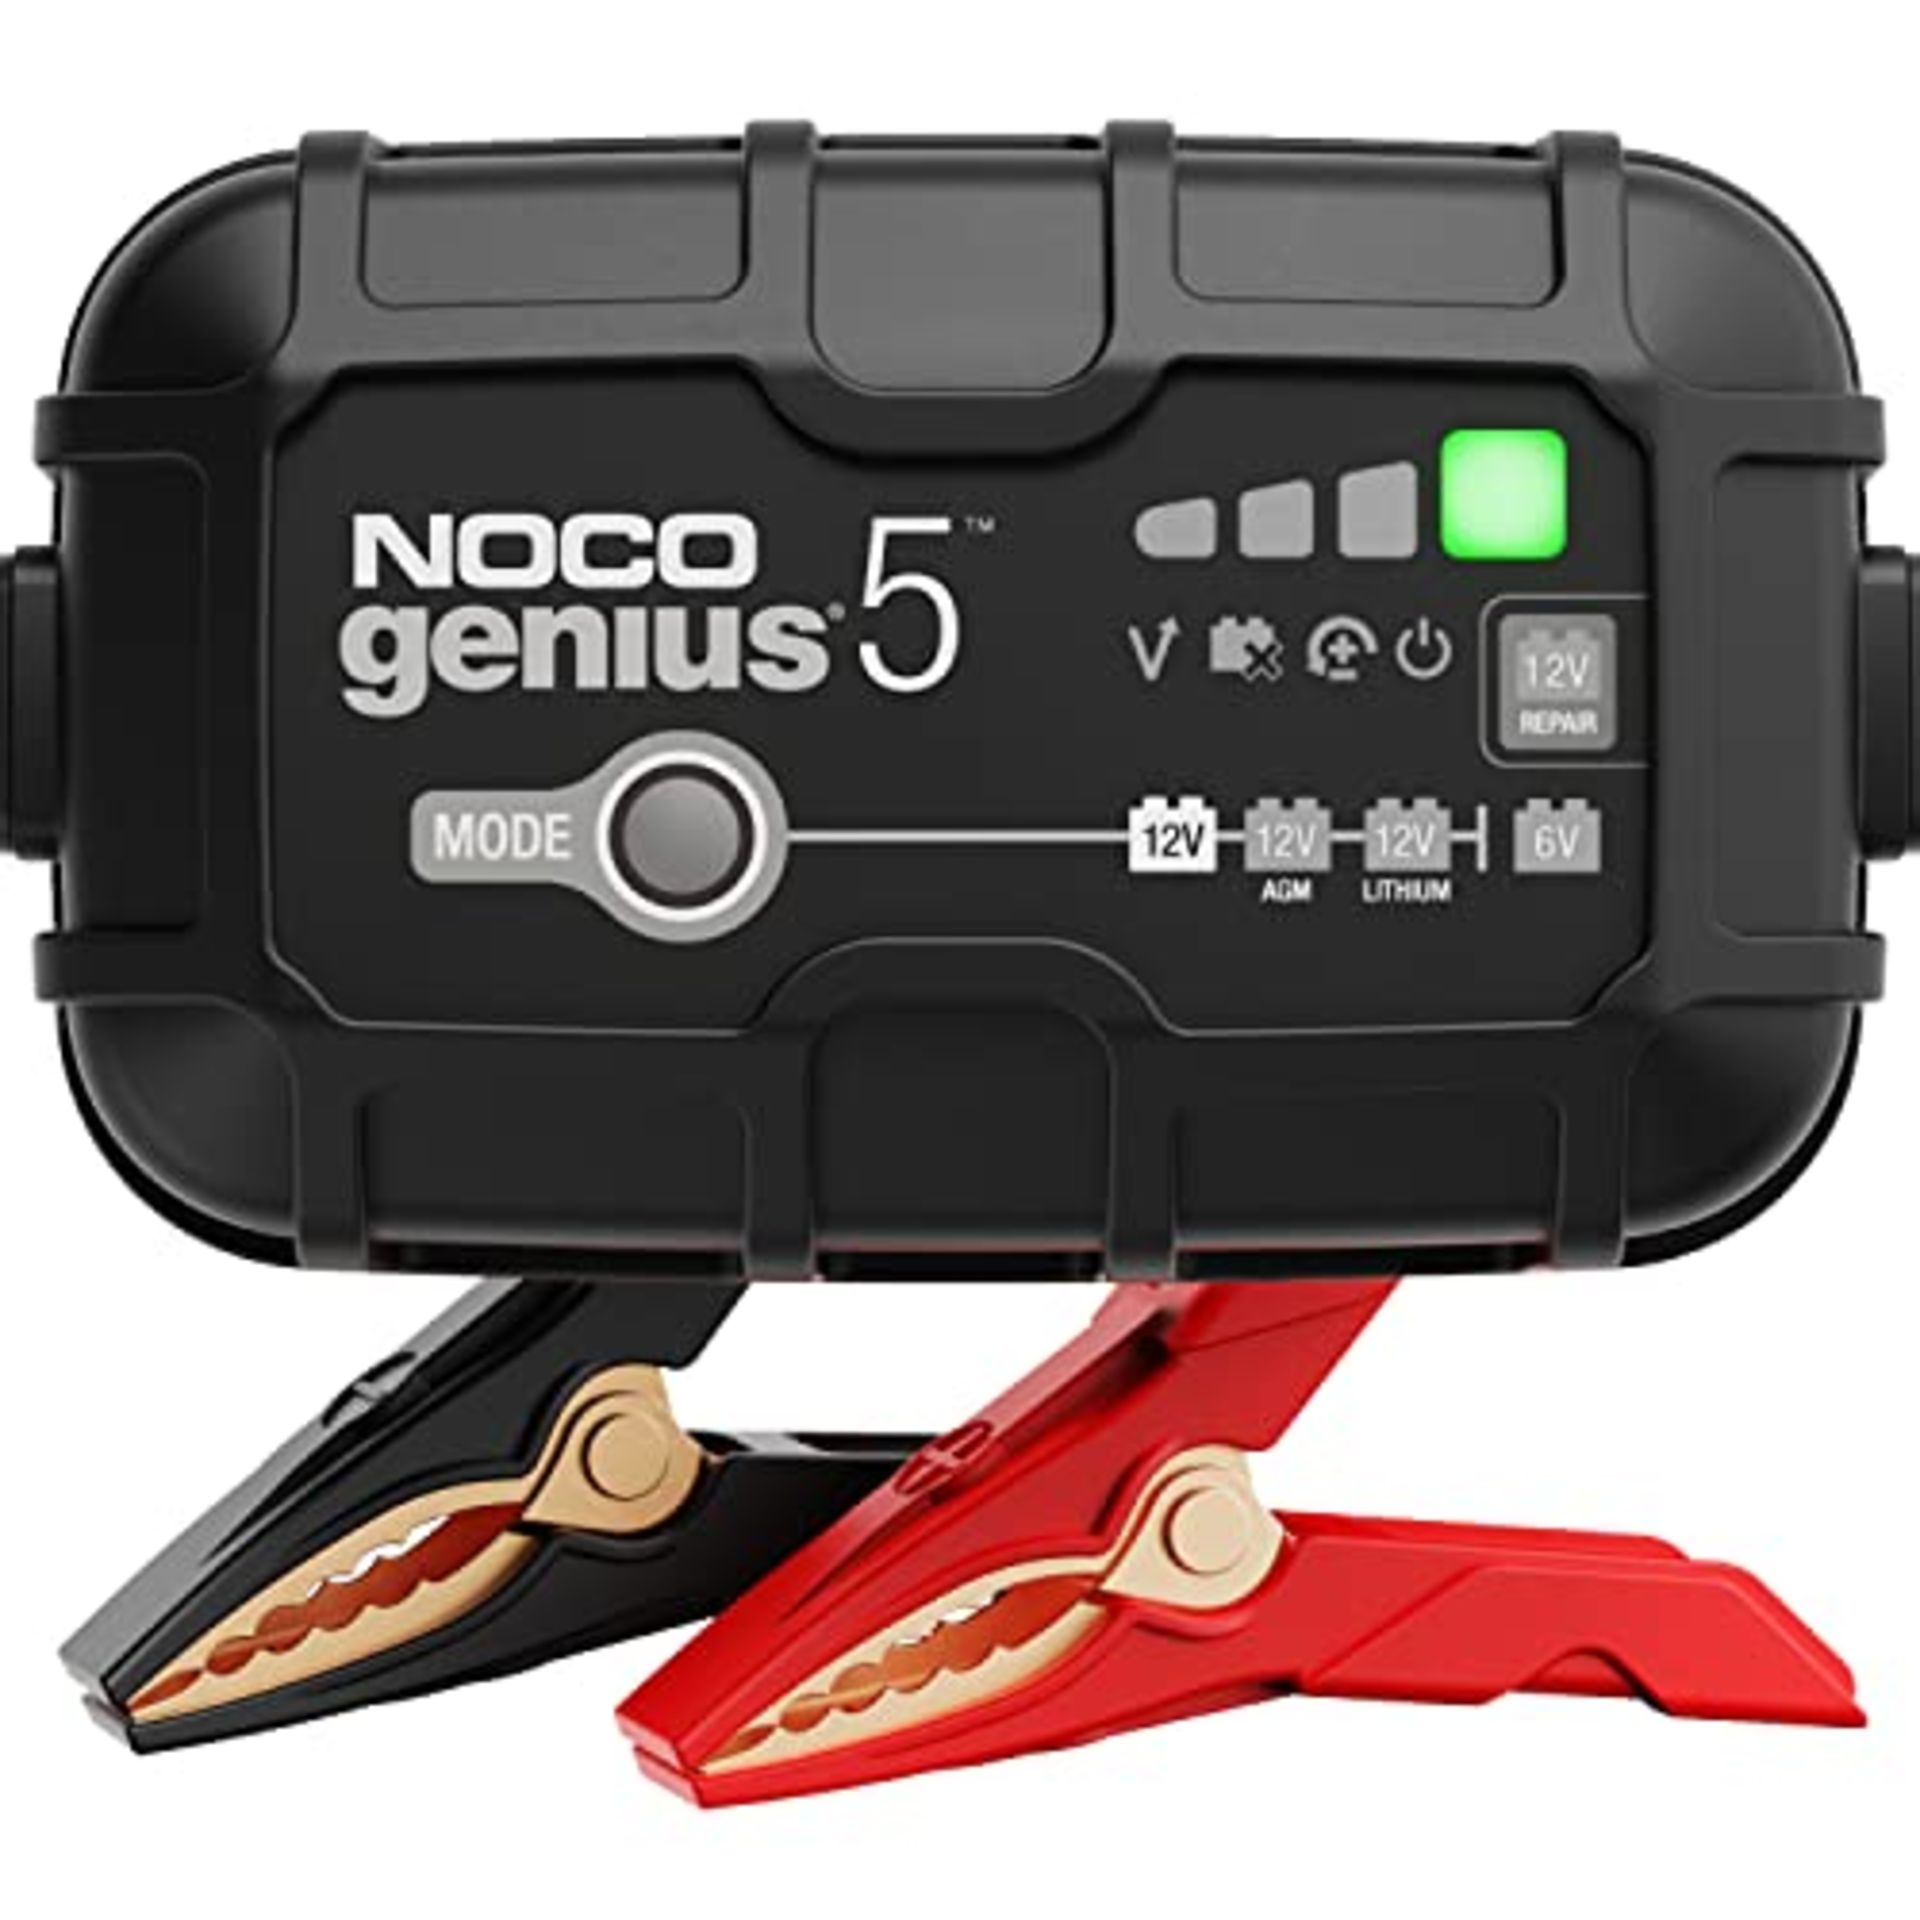 RRP £79.00 NOCO GENIUS5UK, 5A Car Battery Charger, 6V and 12V Portable Smart Charger, Battery Mai - Image 7 of 10